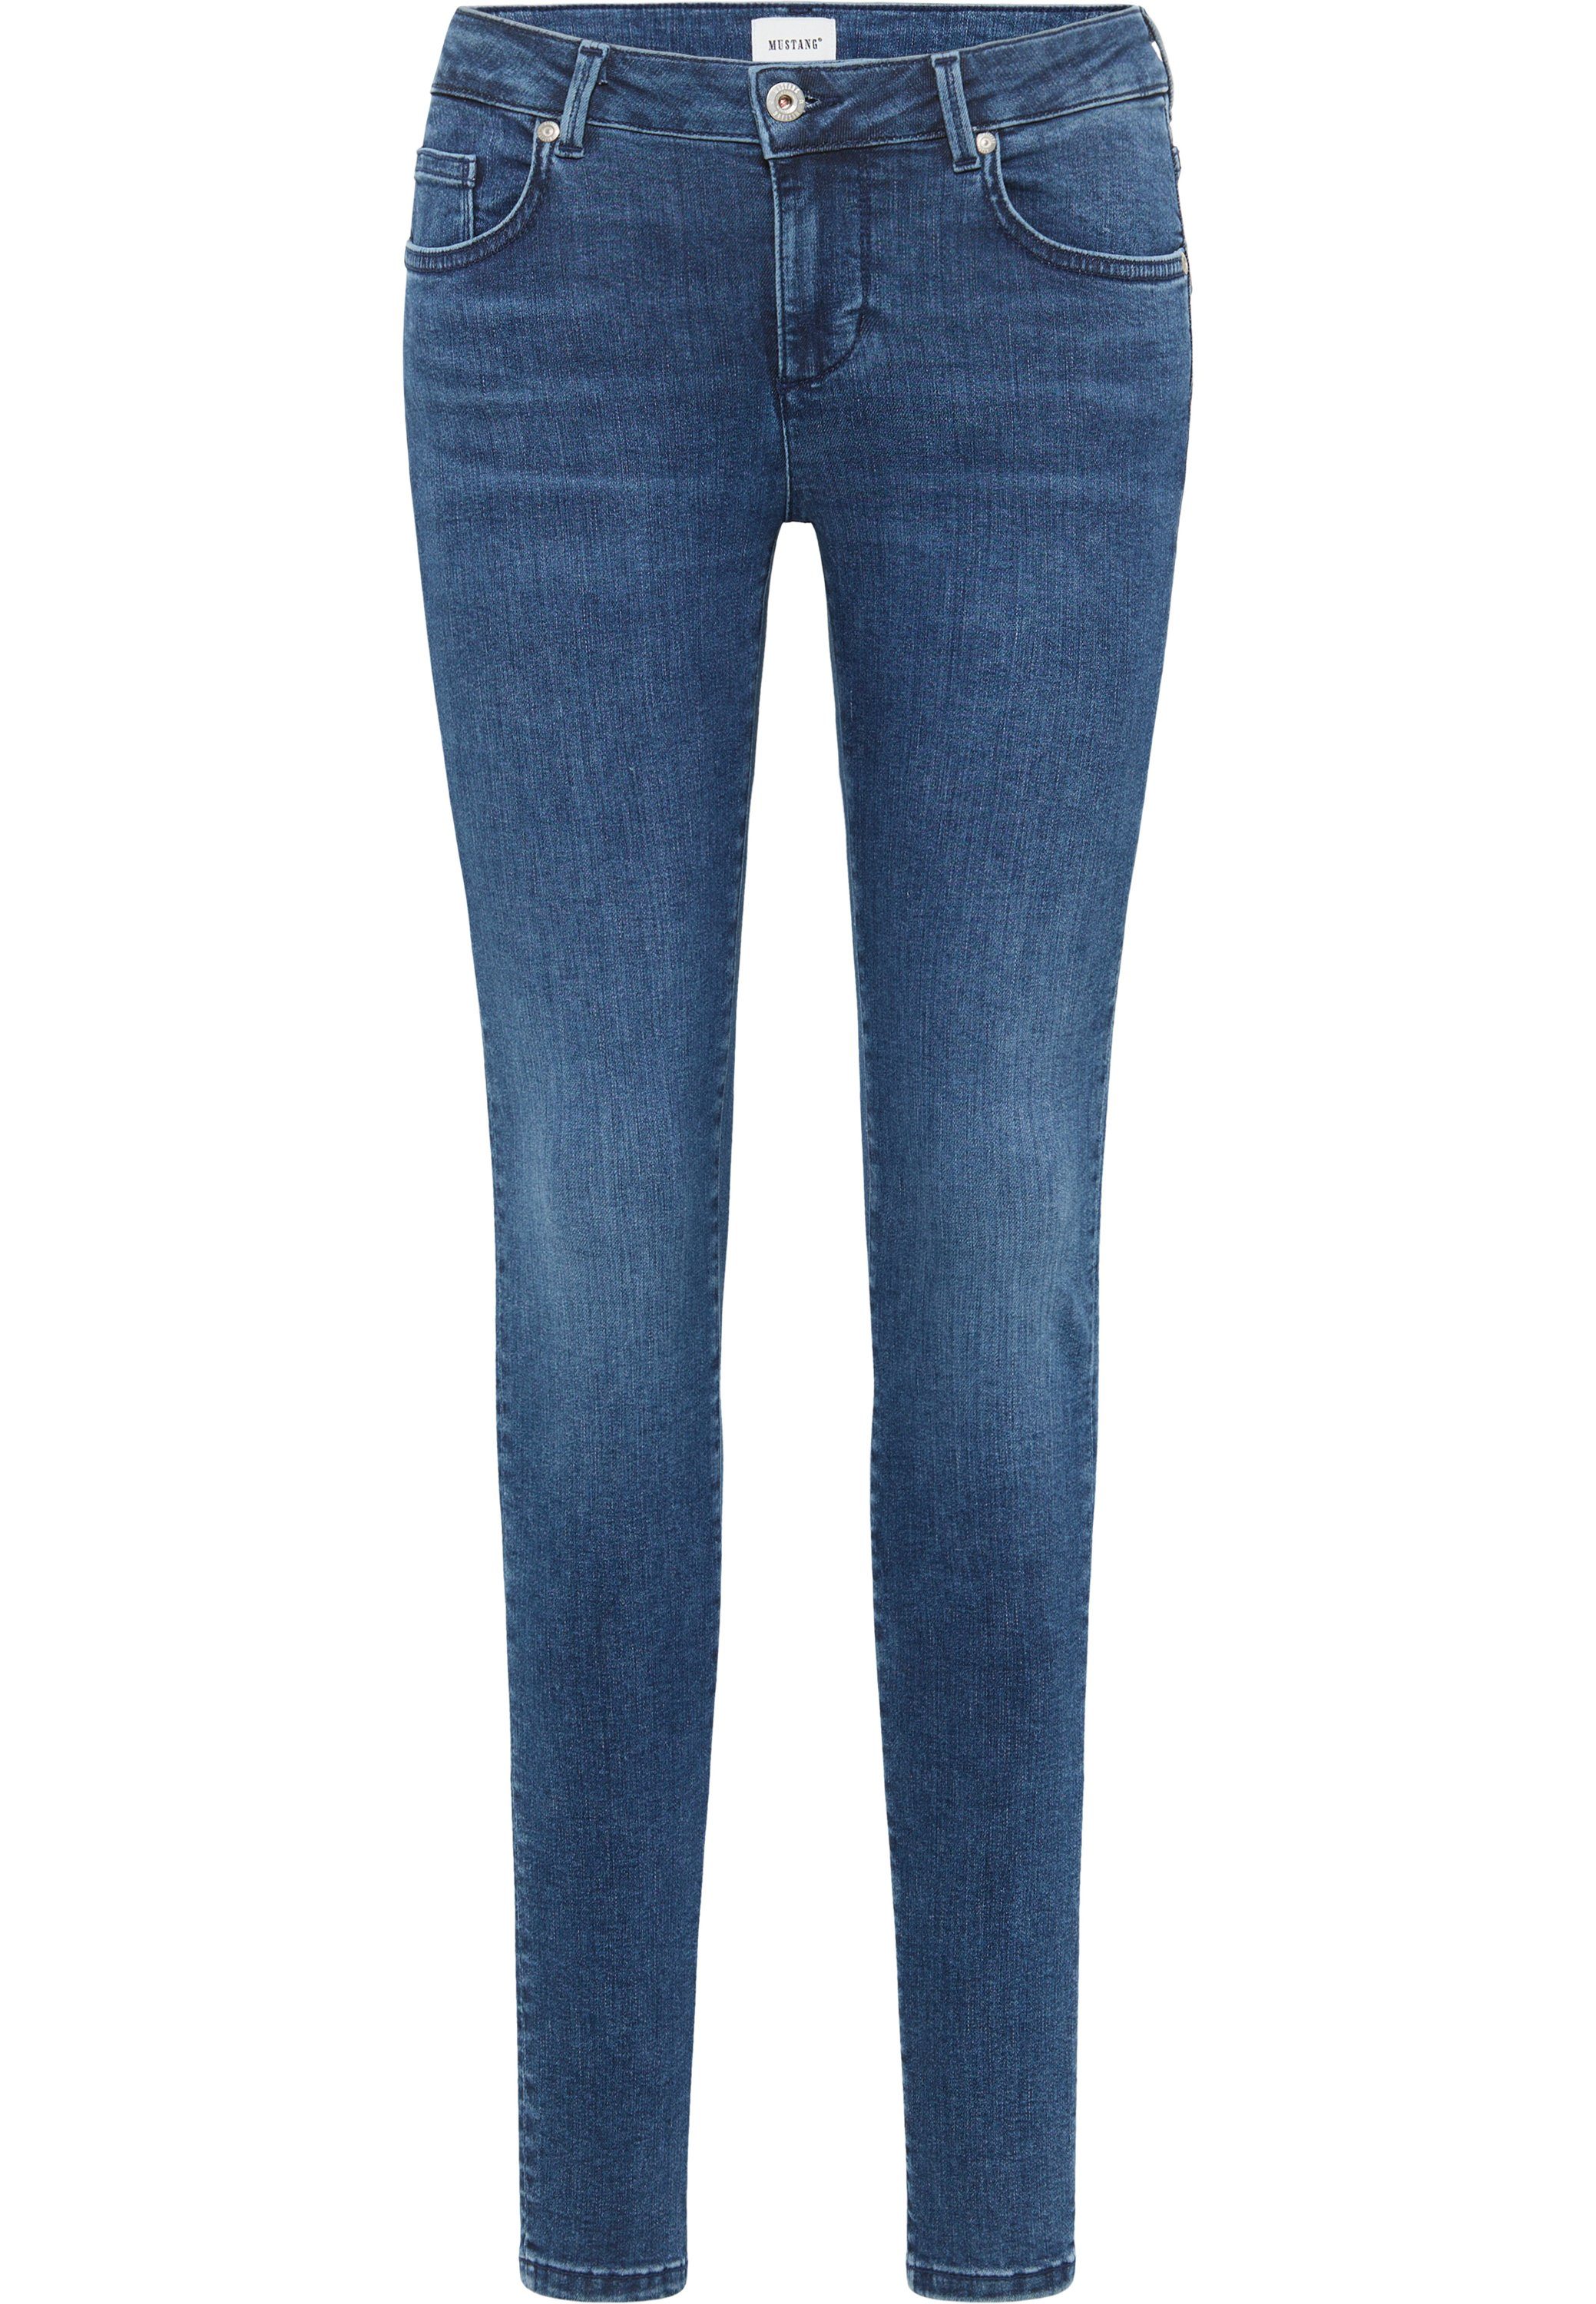 Mustang Skinny fit jeans Style Quincy Skinny